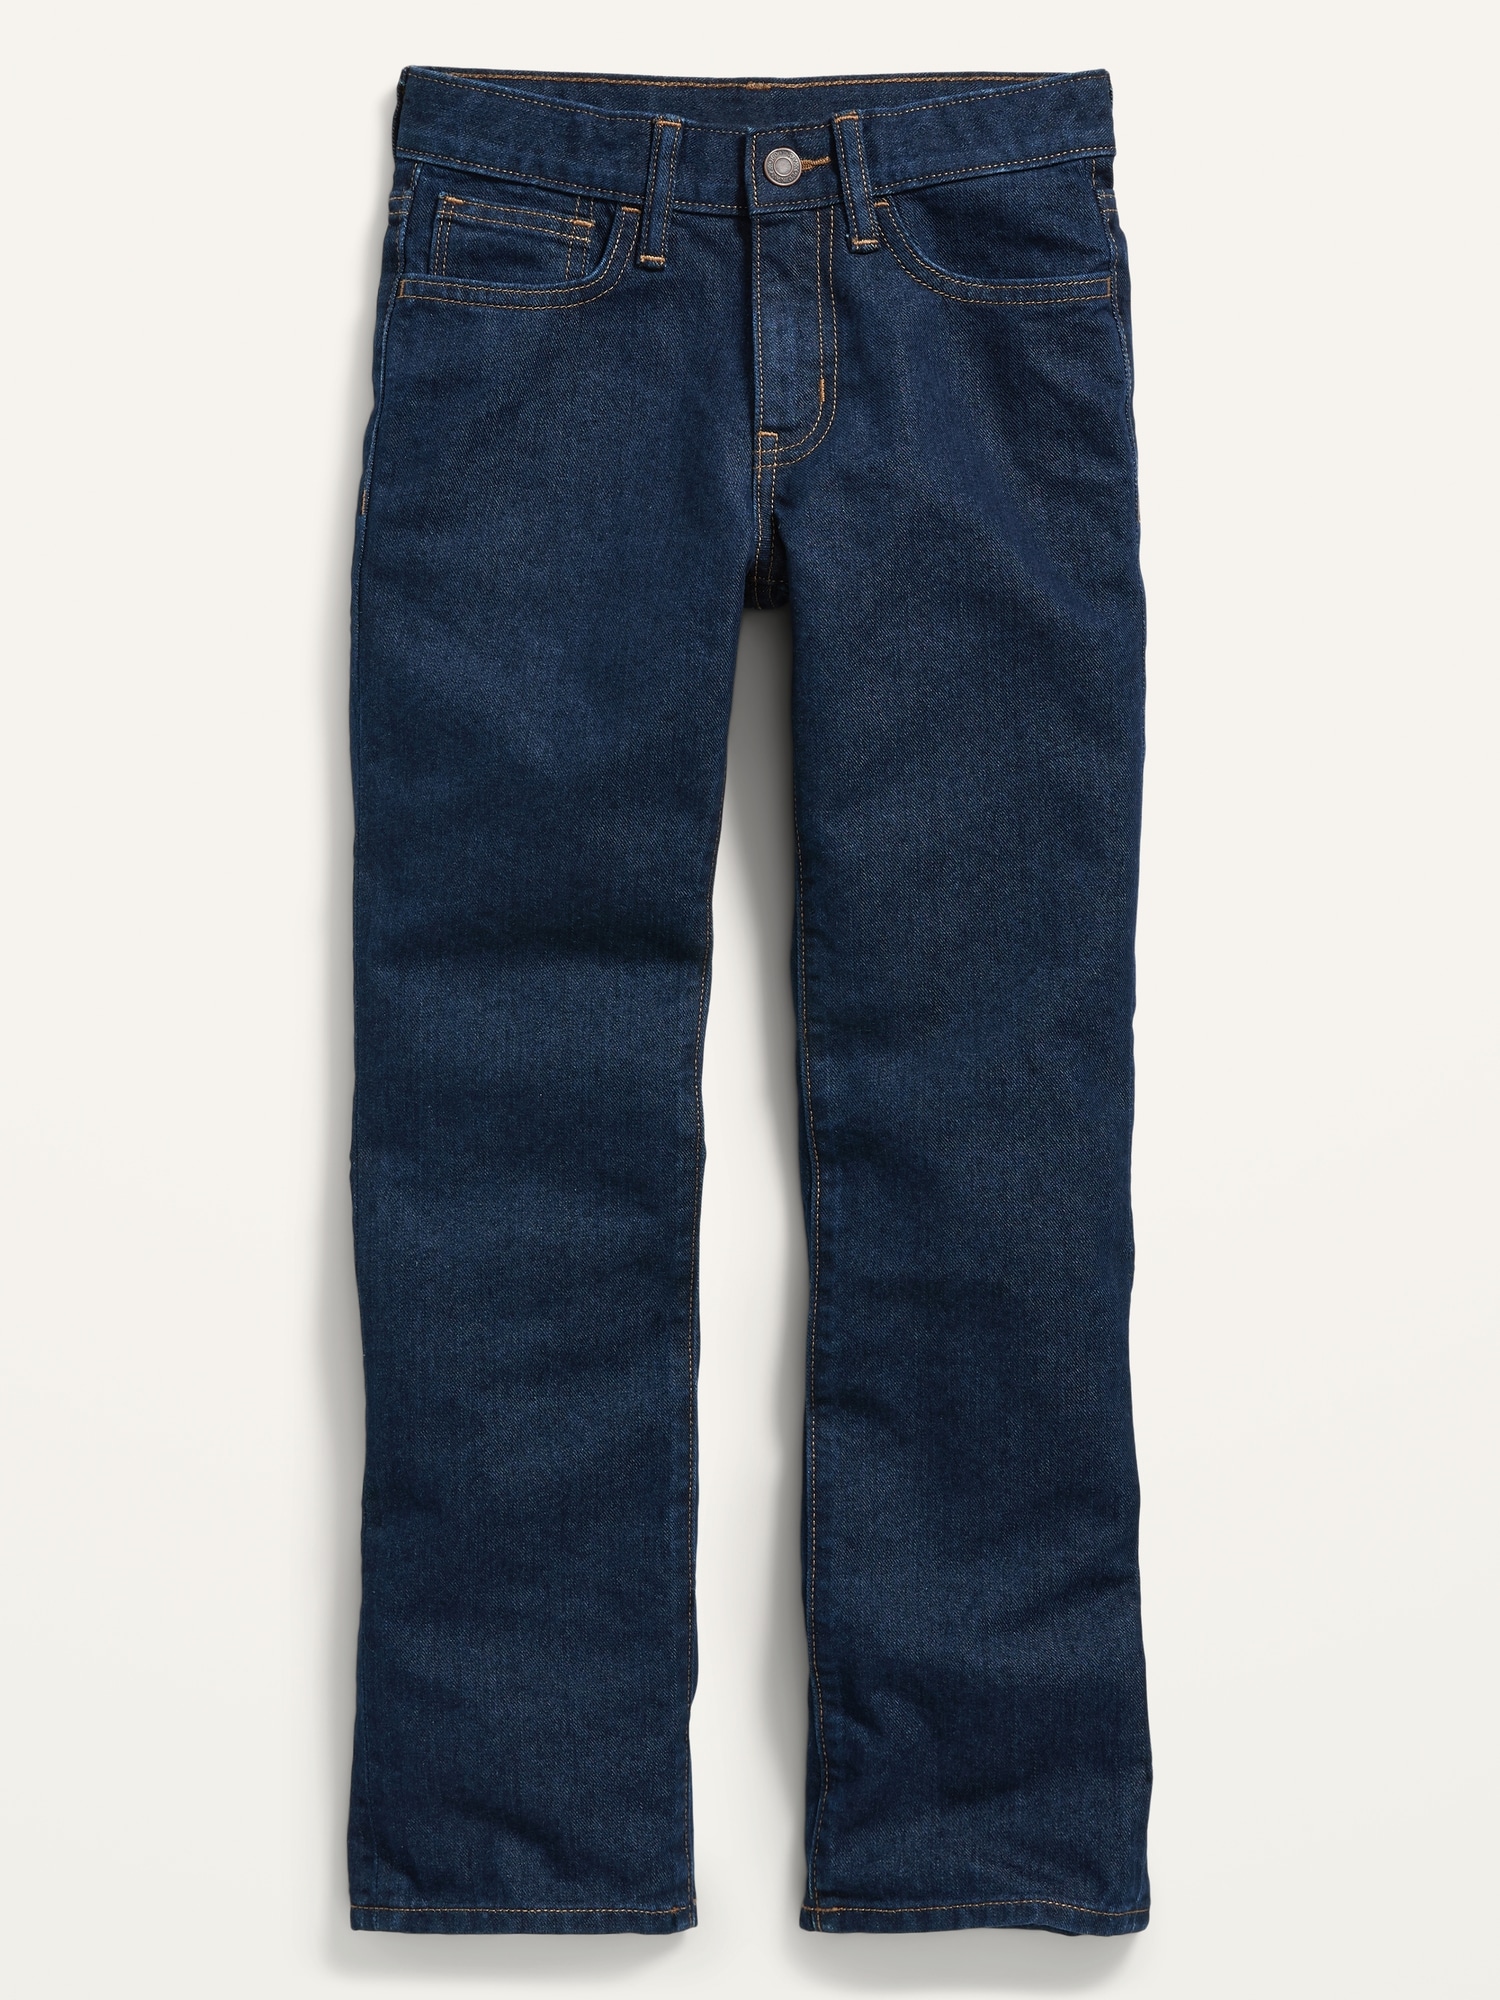 Old Navy Wow Straight Non-Stretch Jeans for Boys blue. 1